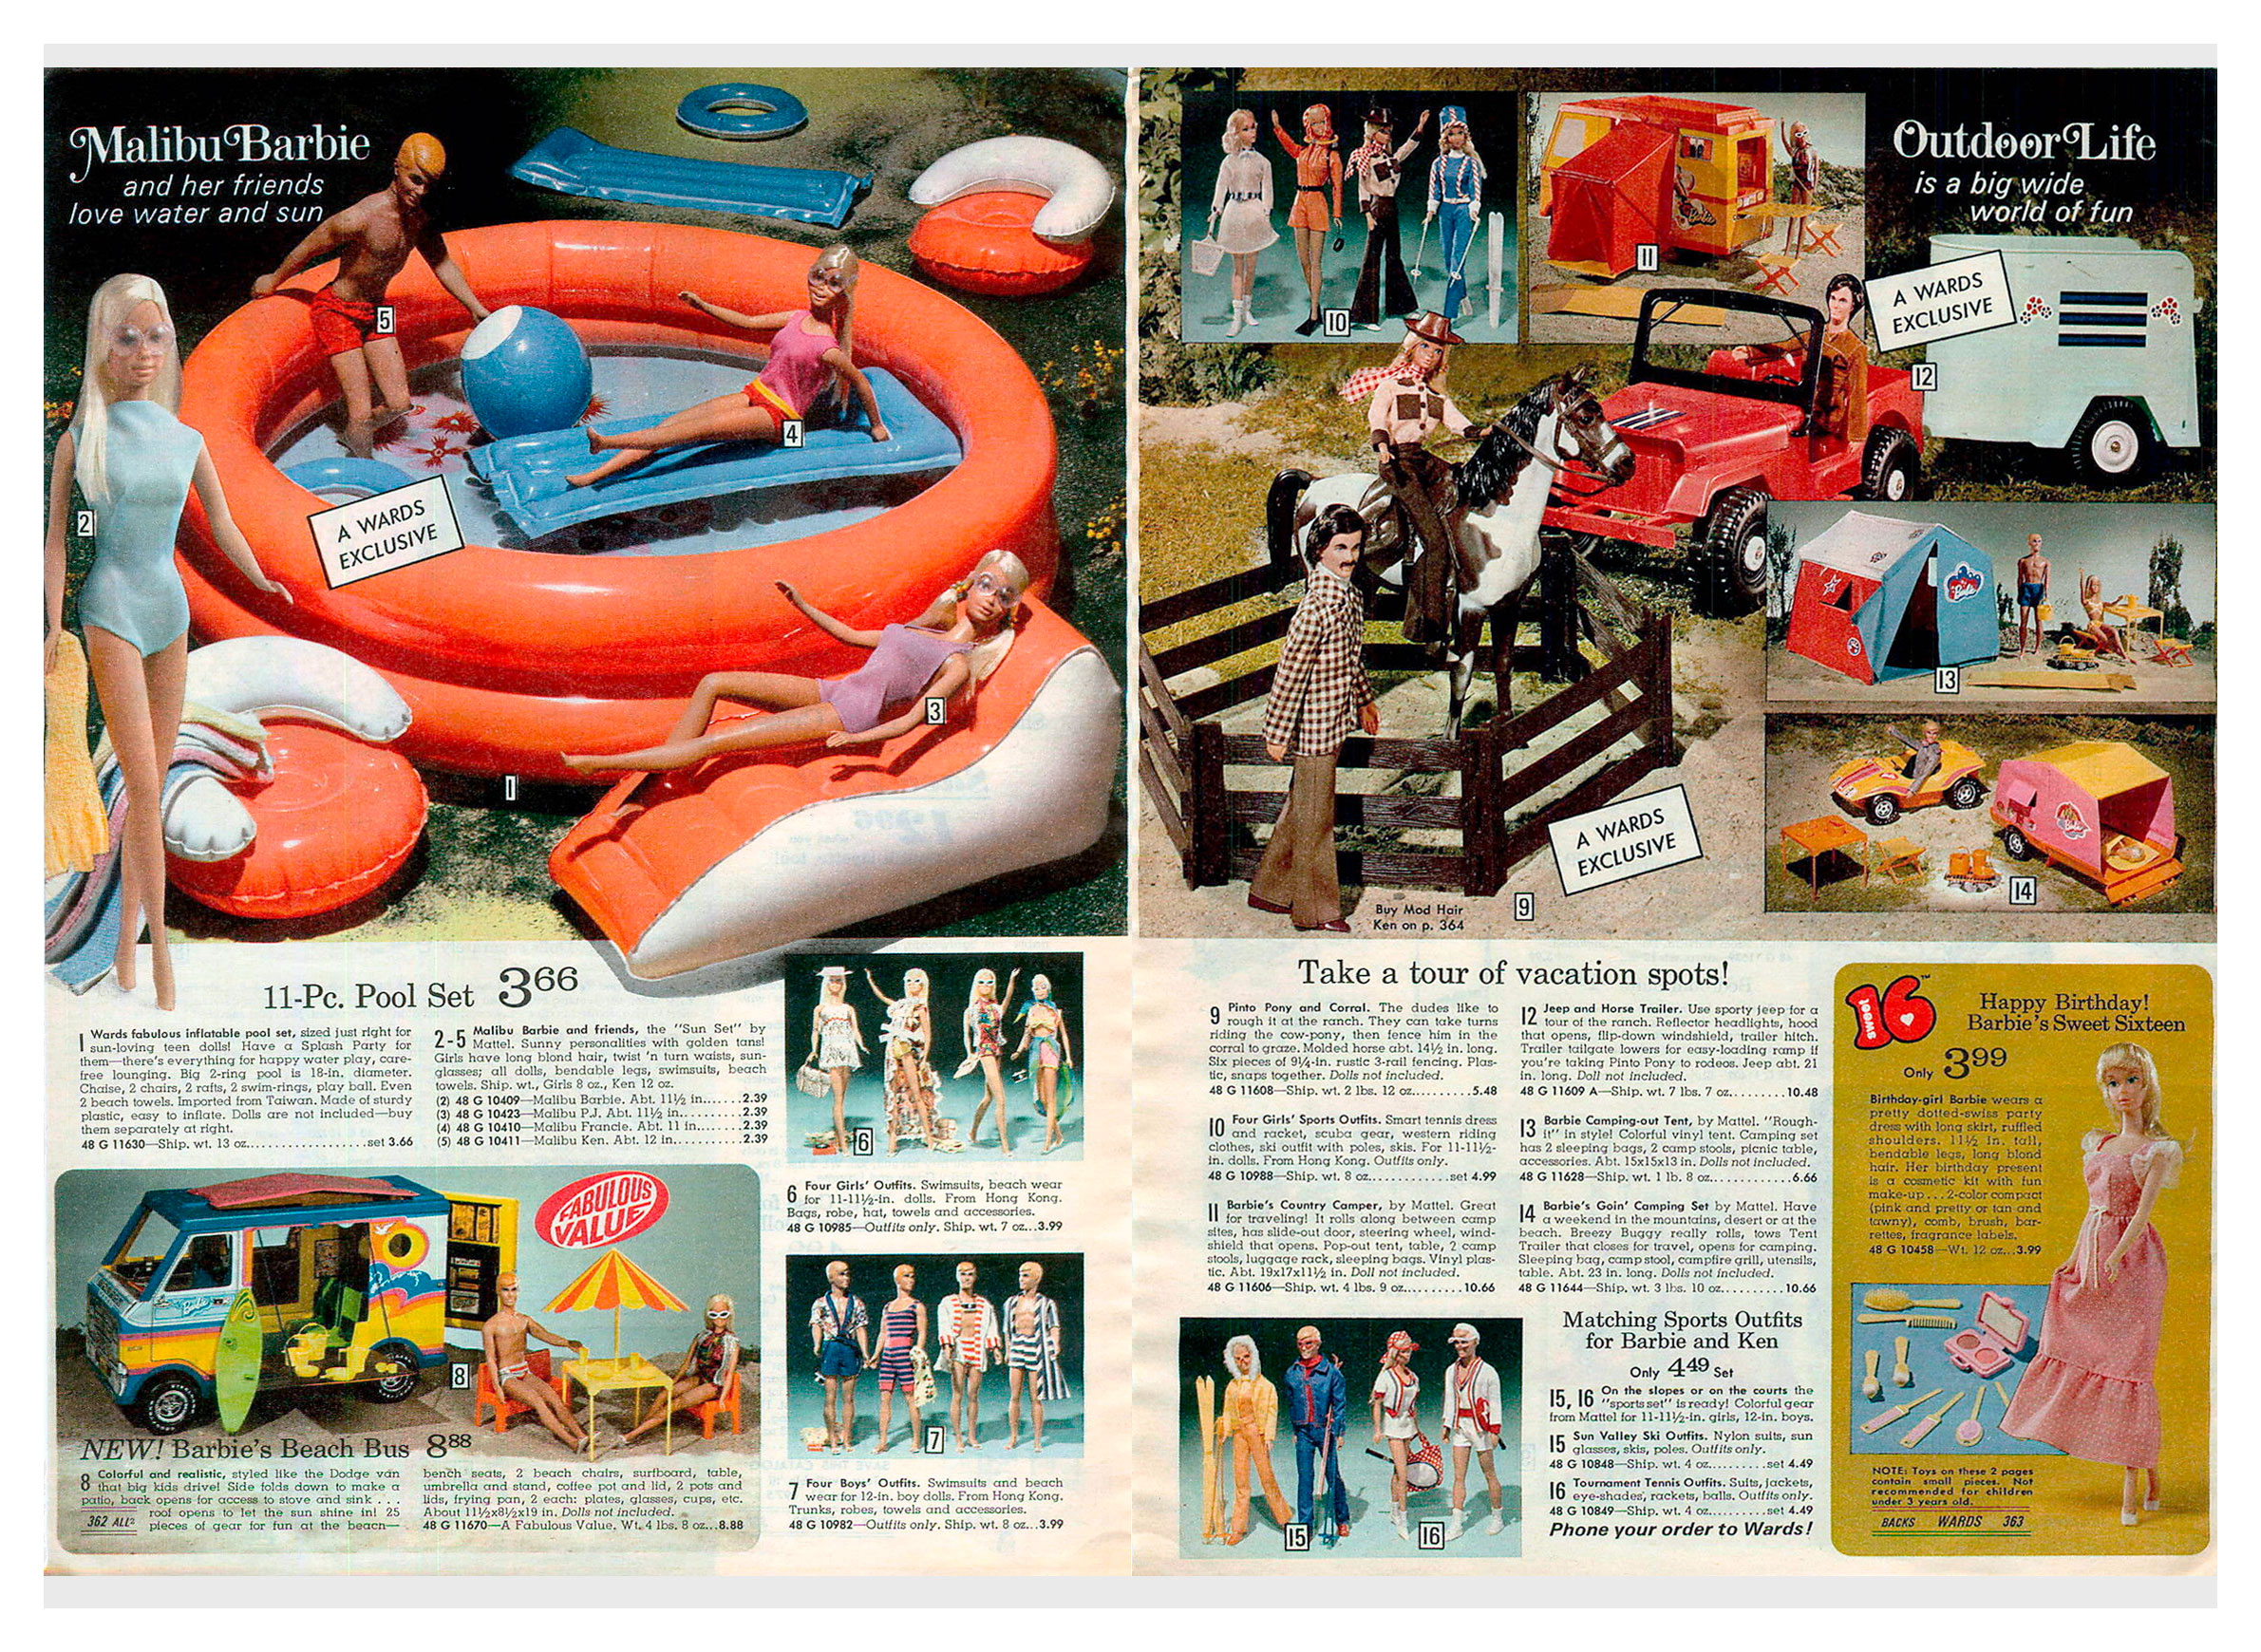 From 1974 Montgomery Ward Christmas catalogue